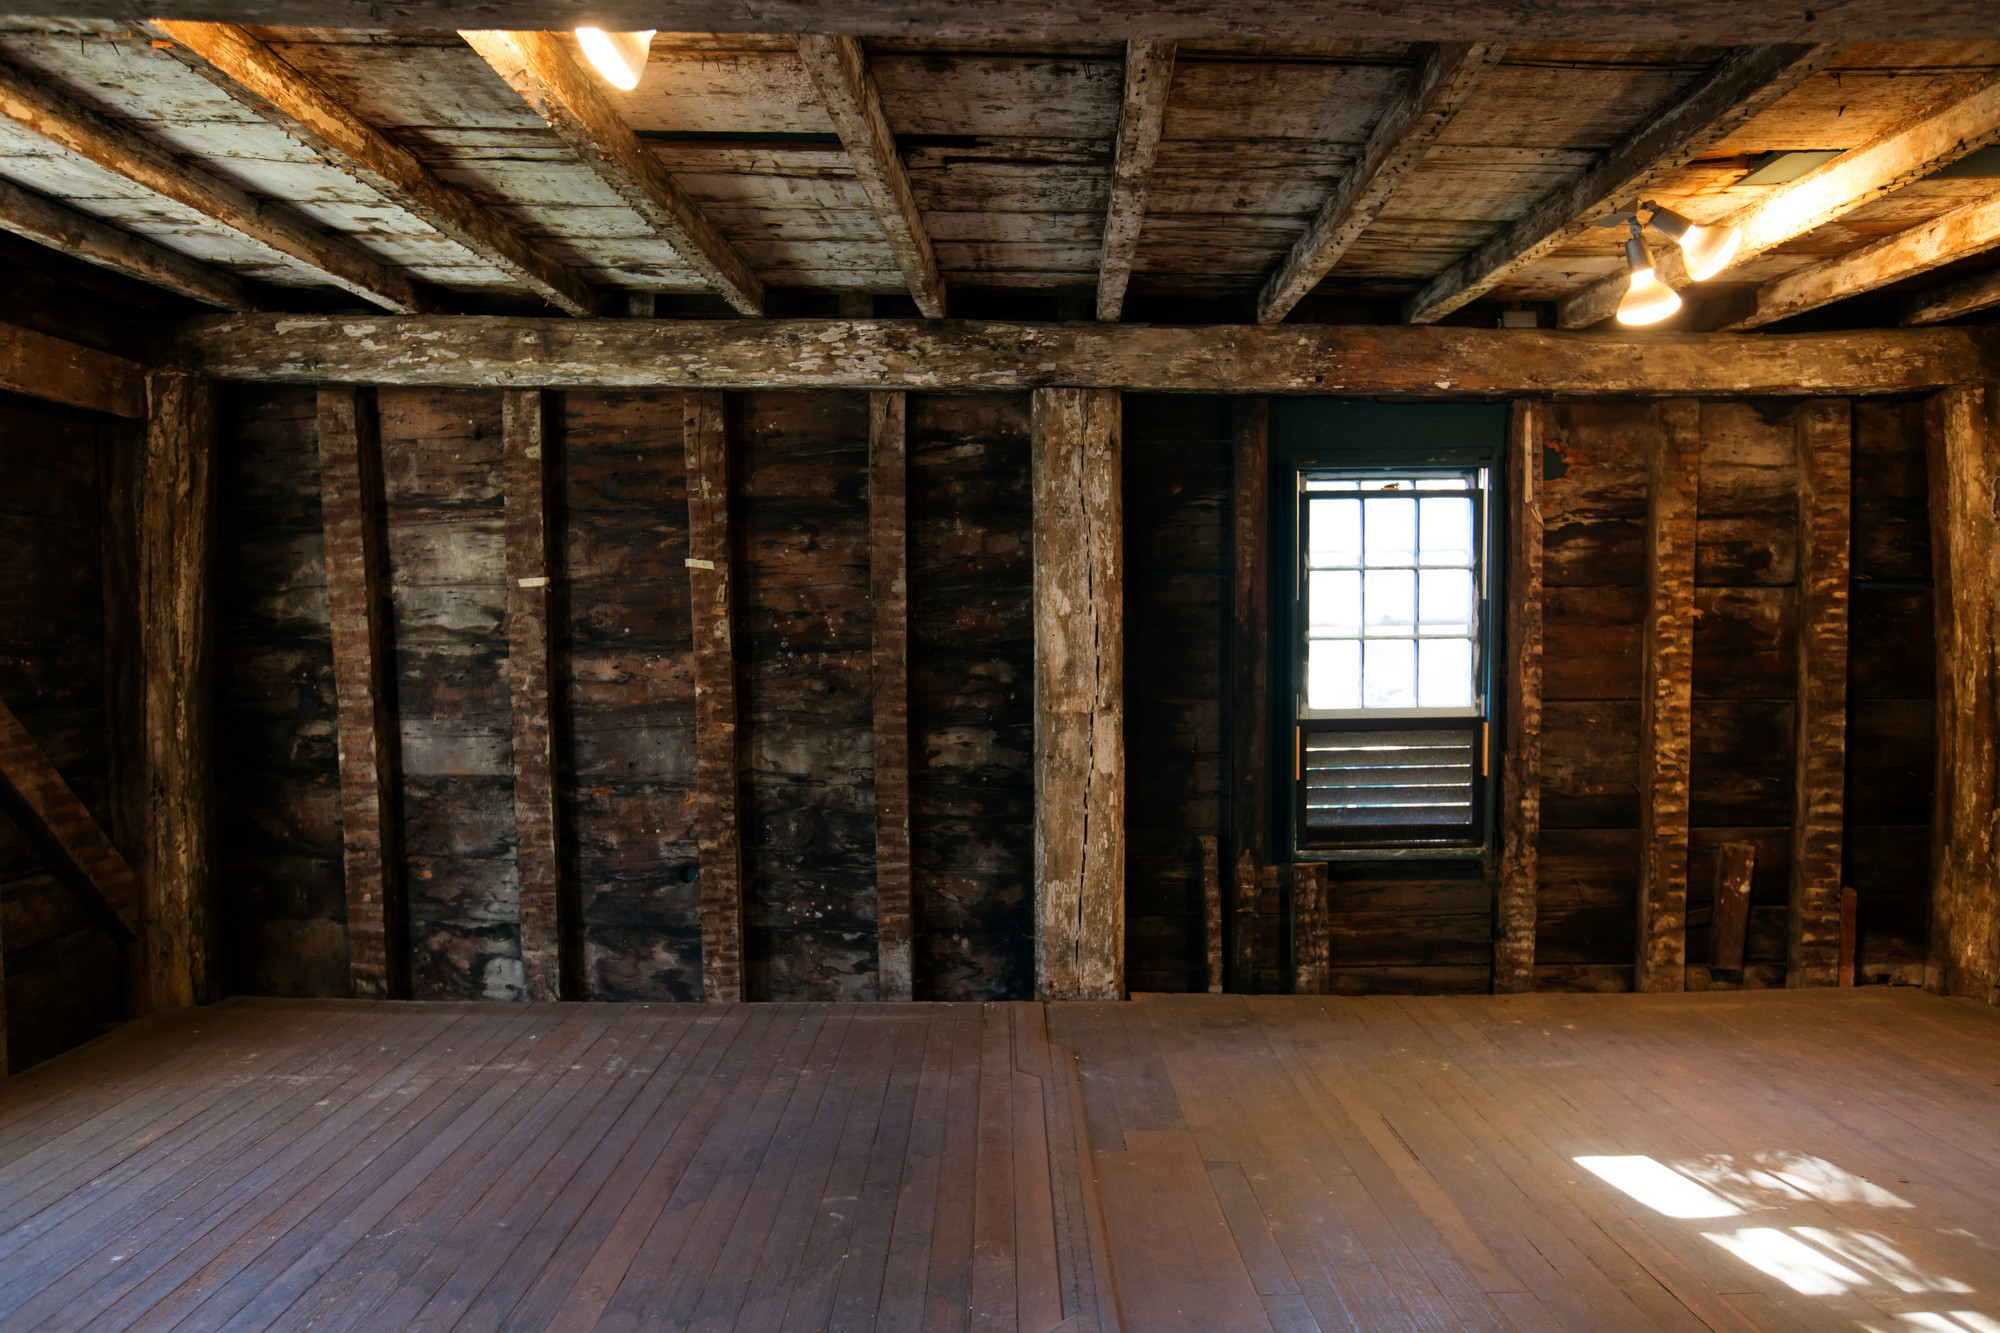 Interior room with exposed beams and framing